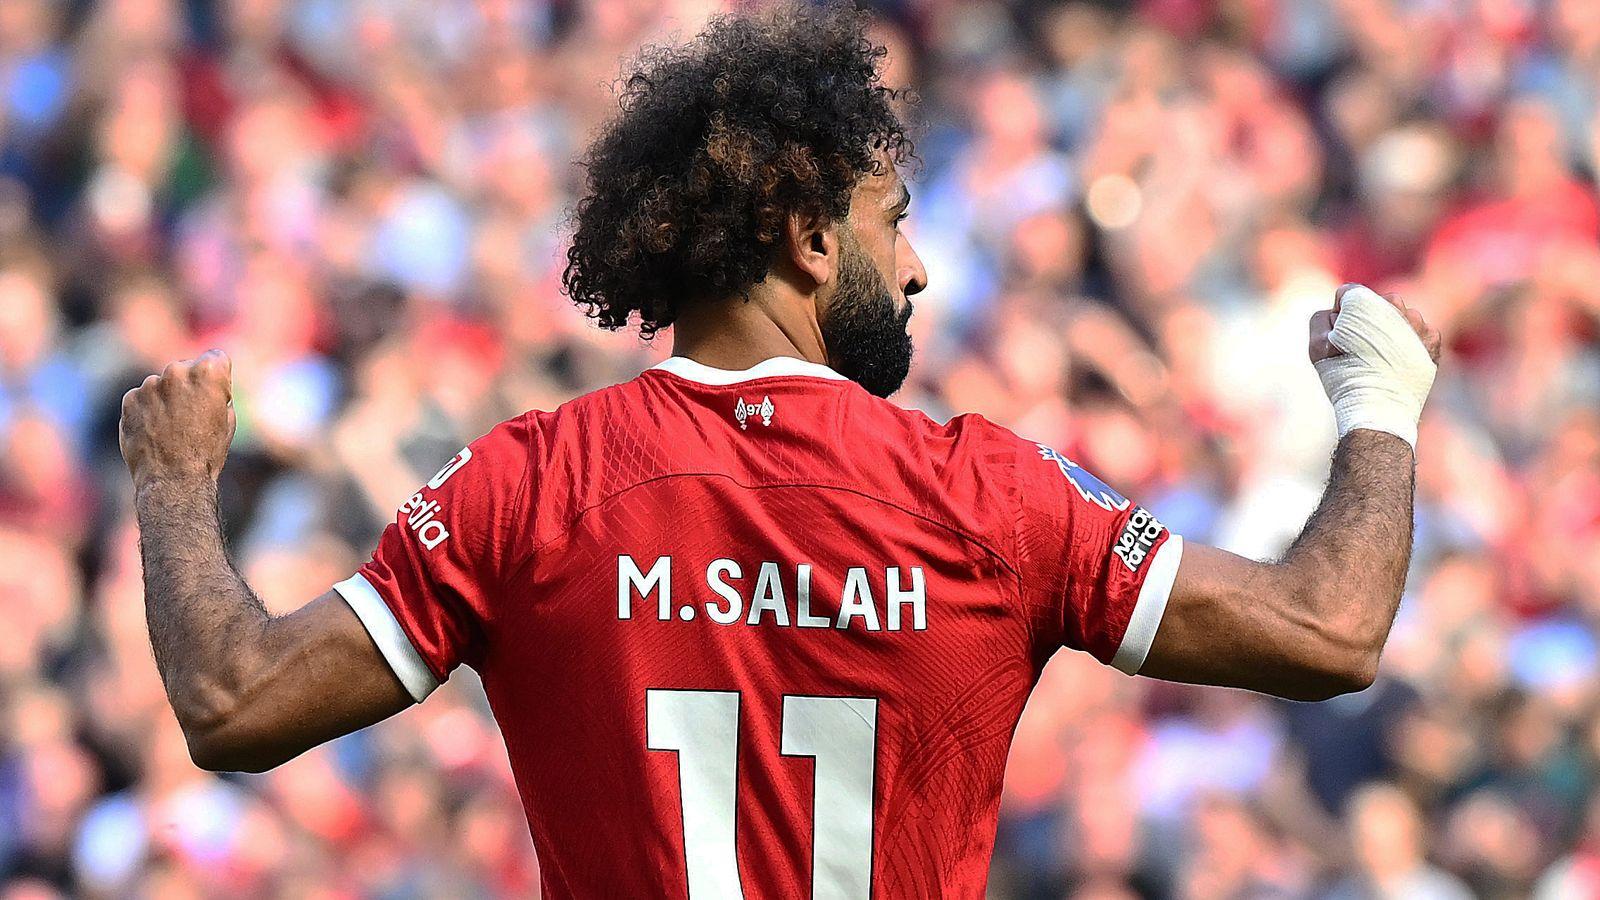 FPL Gameweek 38 Transfer Tips: Two Players to HOLD - Mohamed Salah